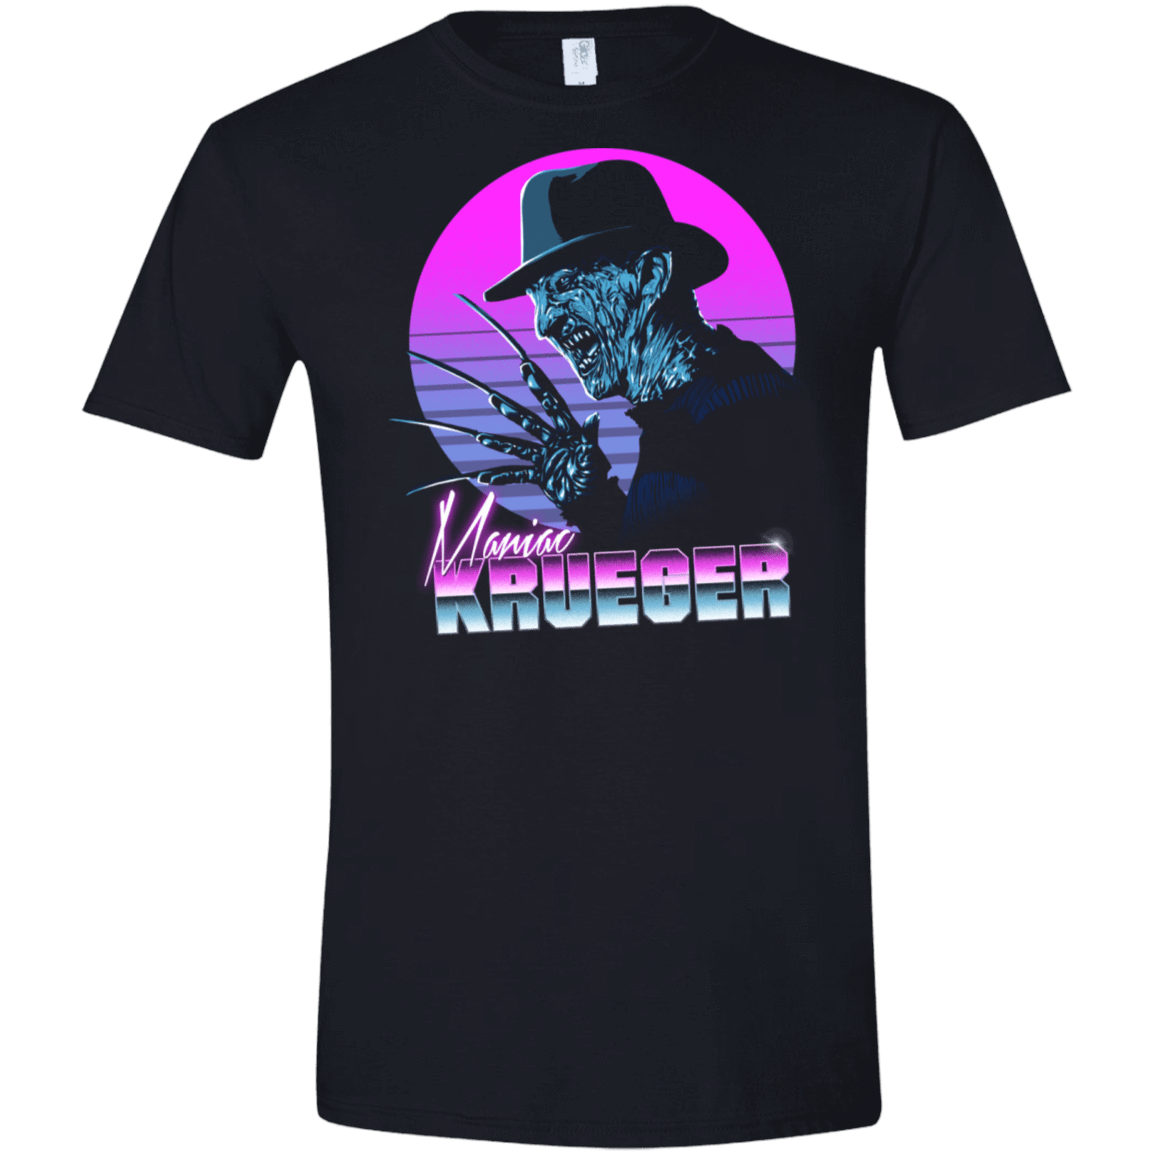 T-Shirts Black / S Retro Krueger Men's Semi-Fitted Softstyle